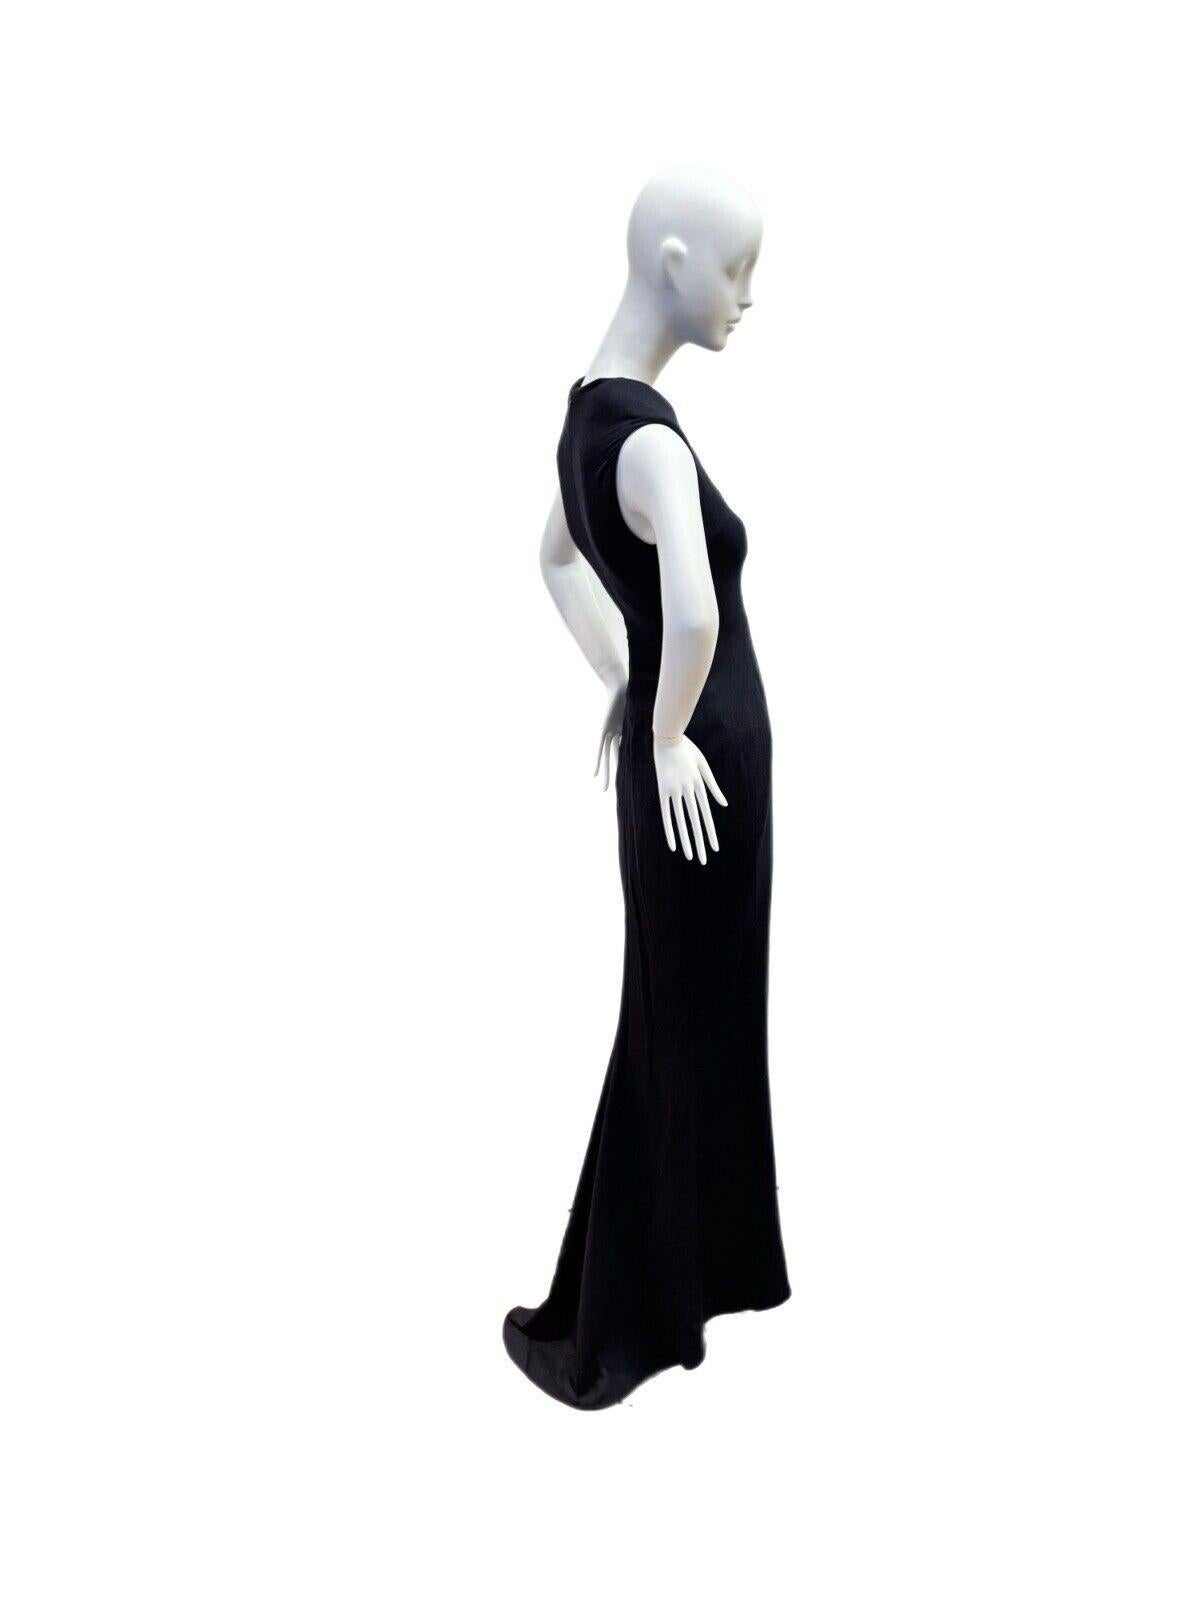 CALVIN KLEIN COLLECTION 2007 vintage runway evening gown maxi dress For Sale 1